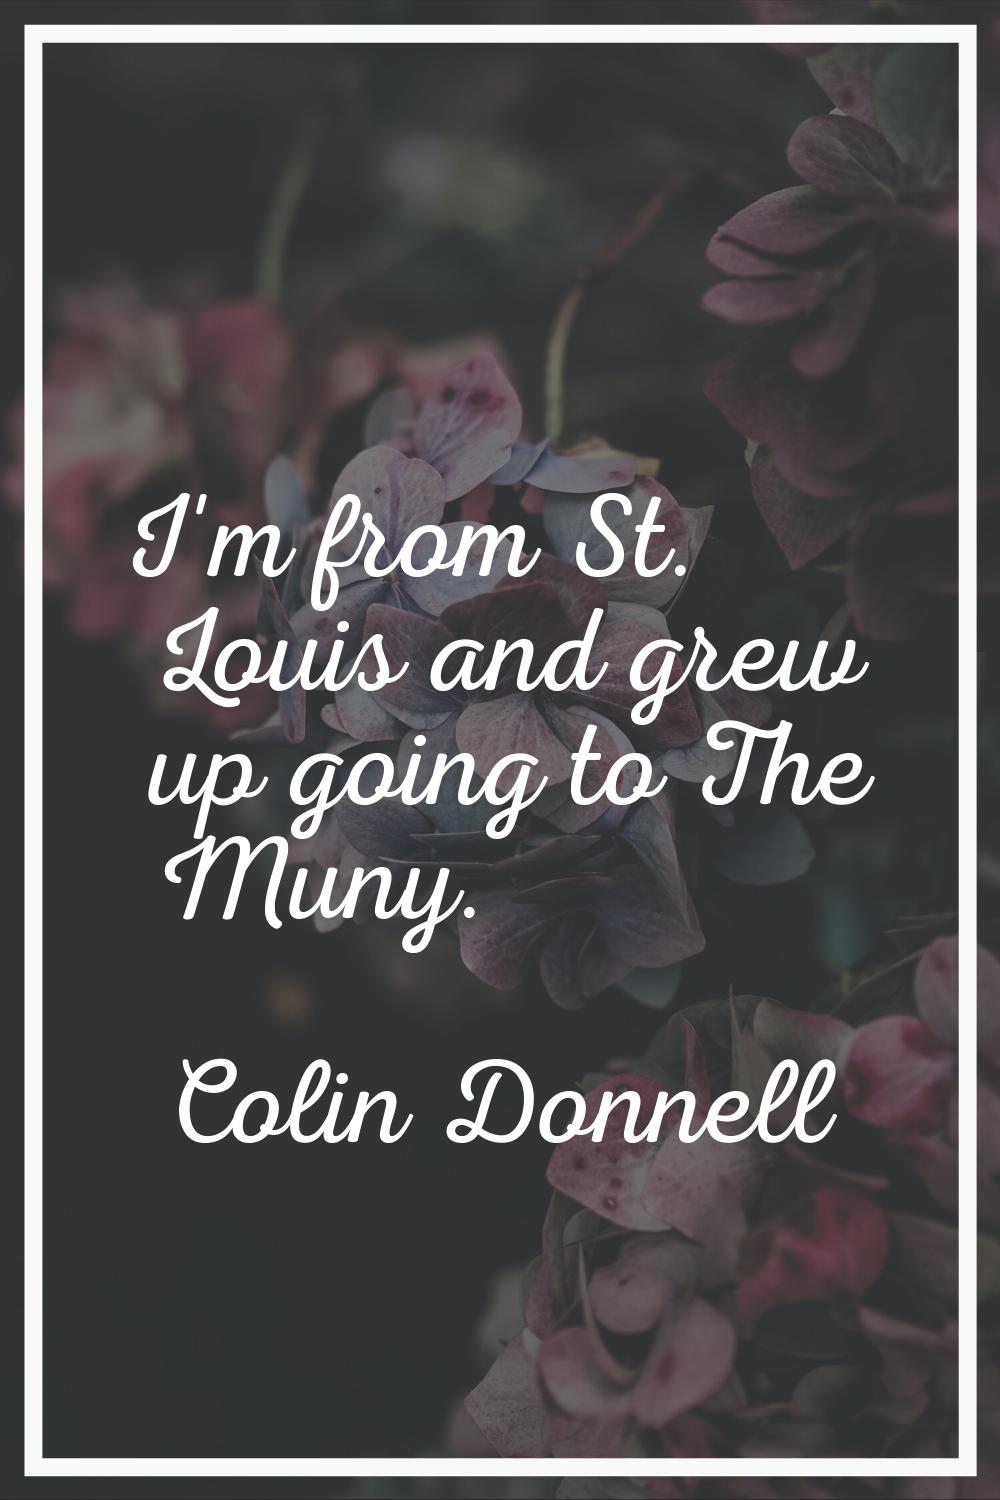 I'm from St. Louis and grew up going to The Muny.